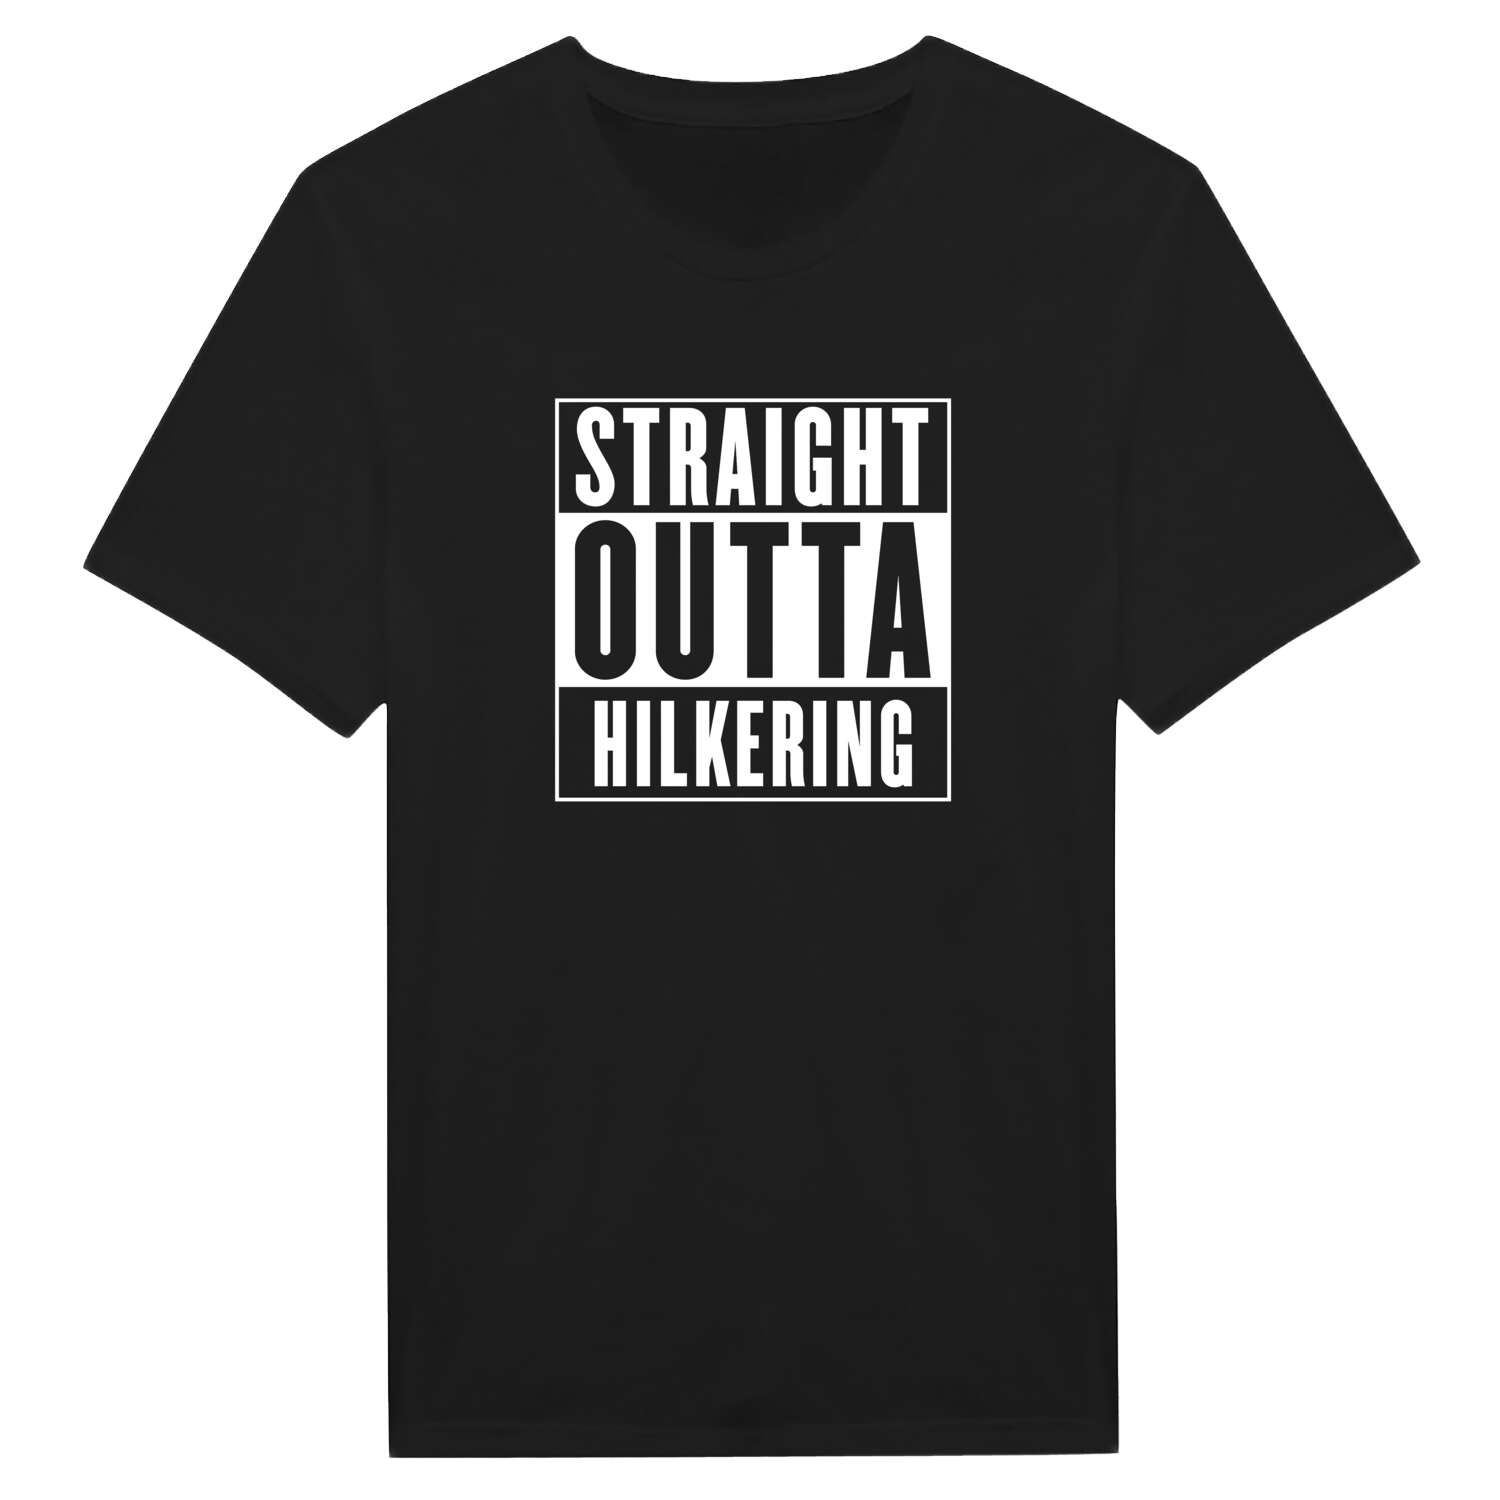 Hilkering T-Shirt »Straight Outta«